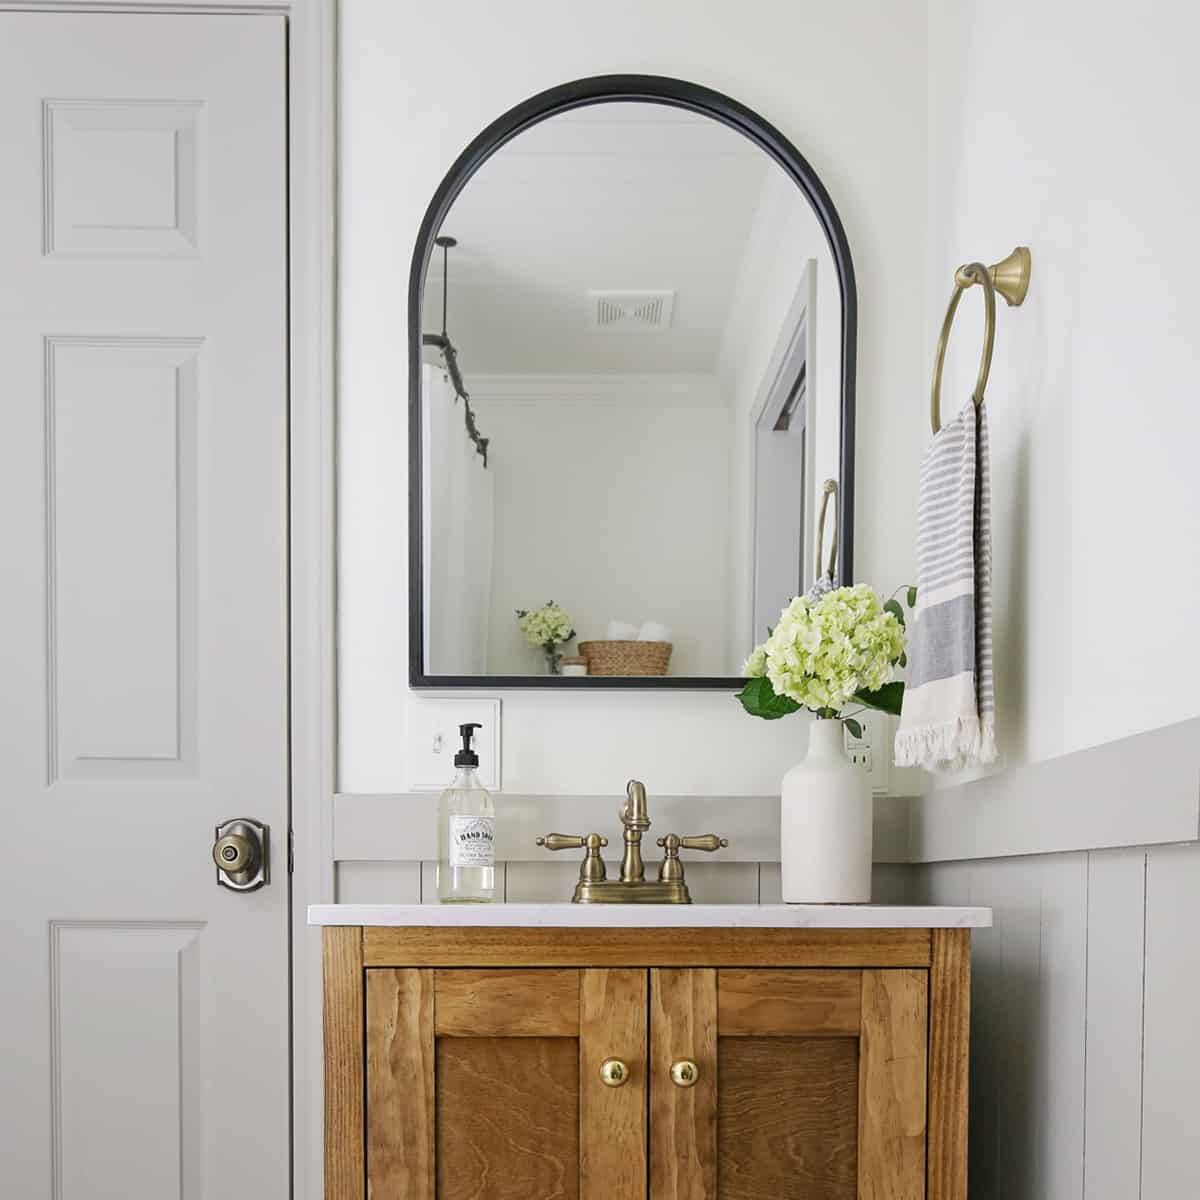 These Are the Most Popular Bathroom Paint Colors for 2019